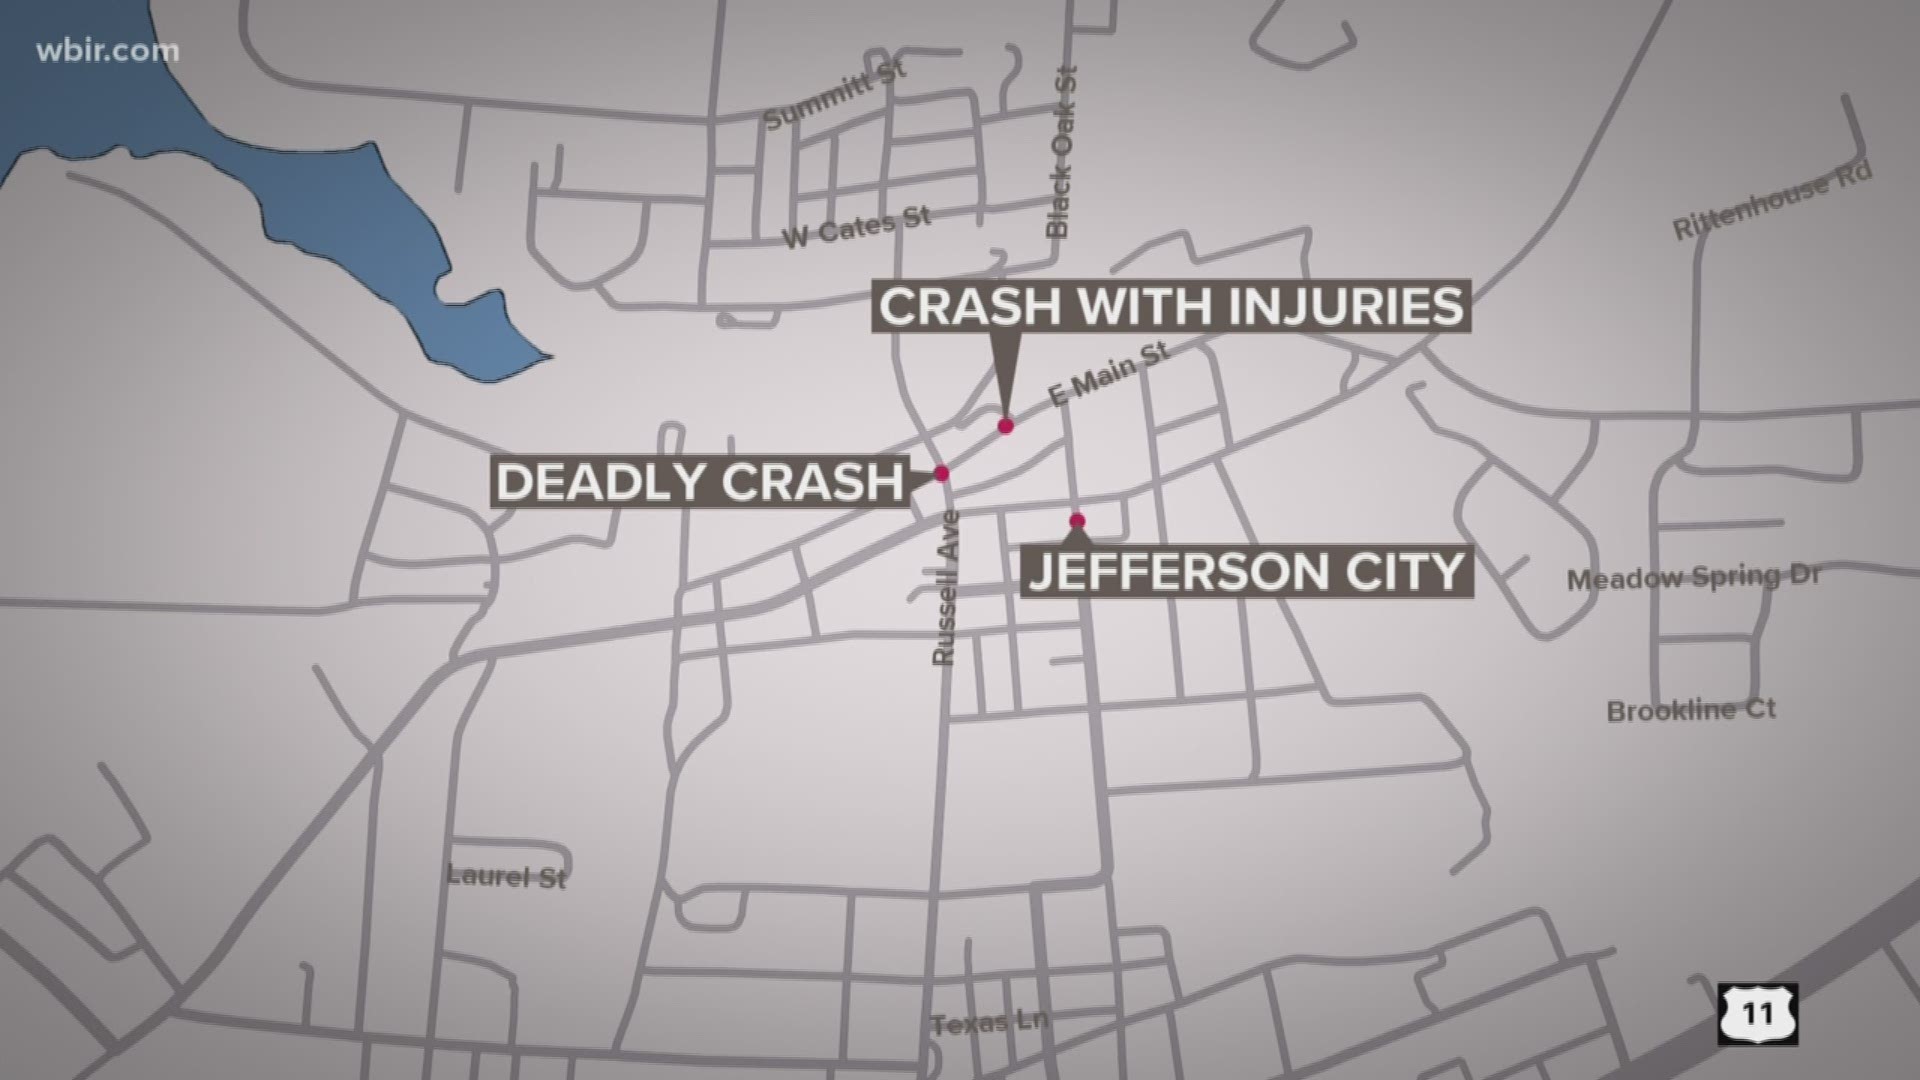 The Jefferson City police department says officers found a car lodged into a building with two pedestrians who had been hit and killed.